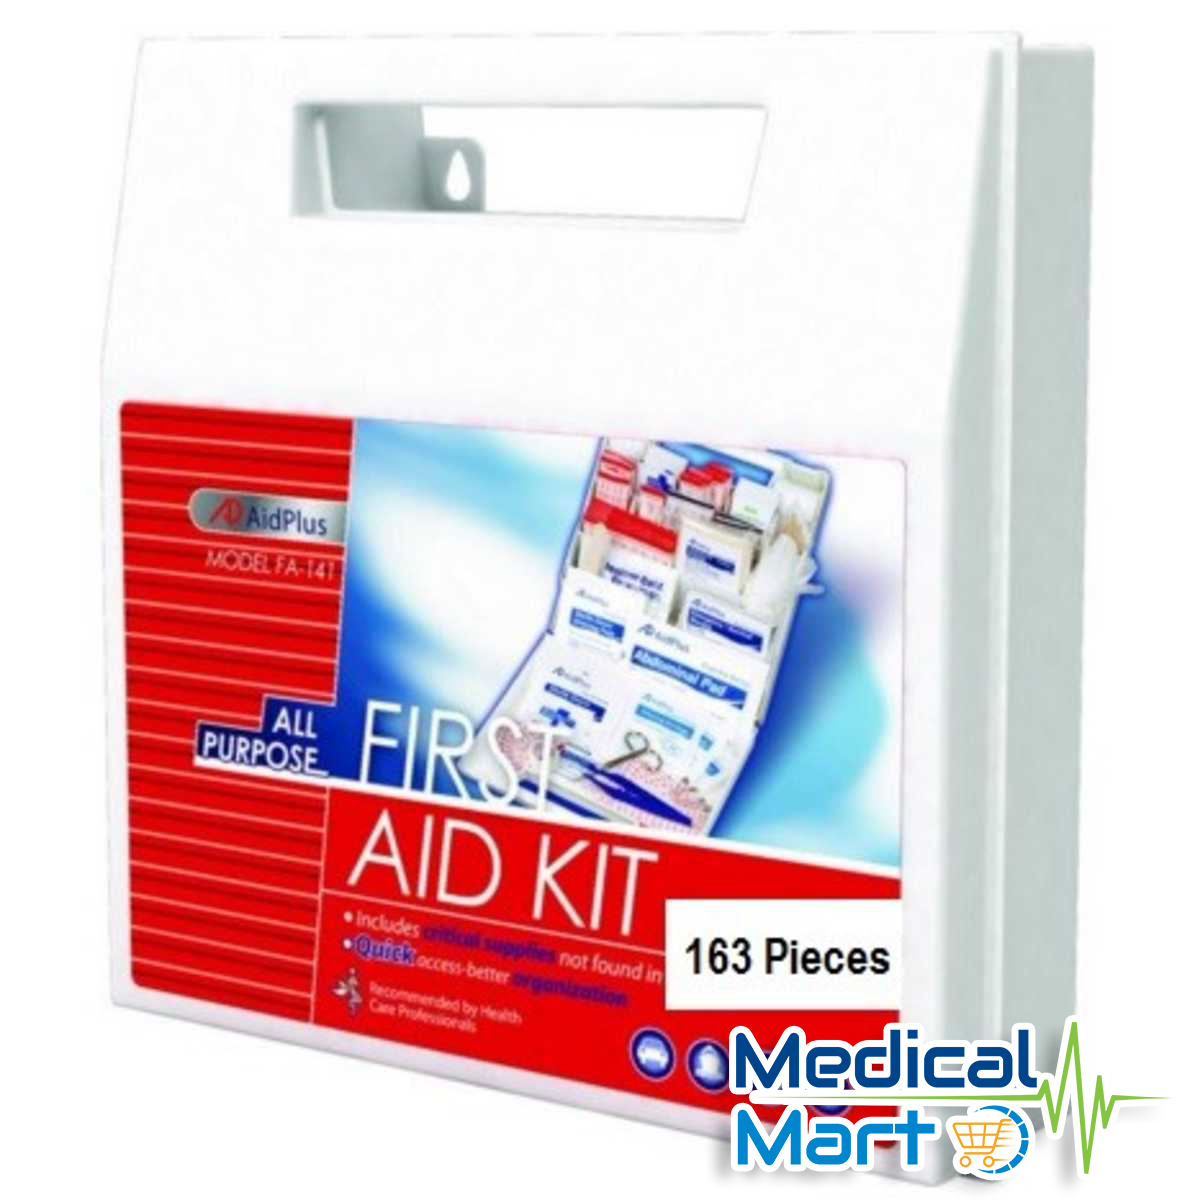 All Purpose First Aid Kit, 50 Person (163 Pieces)